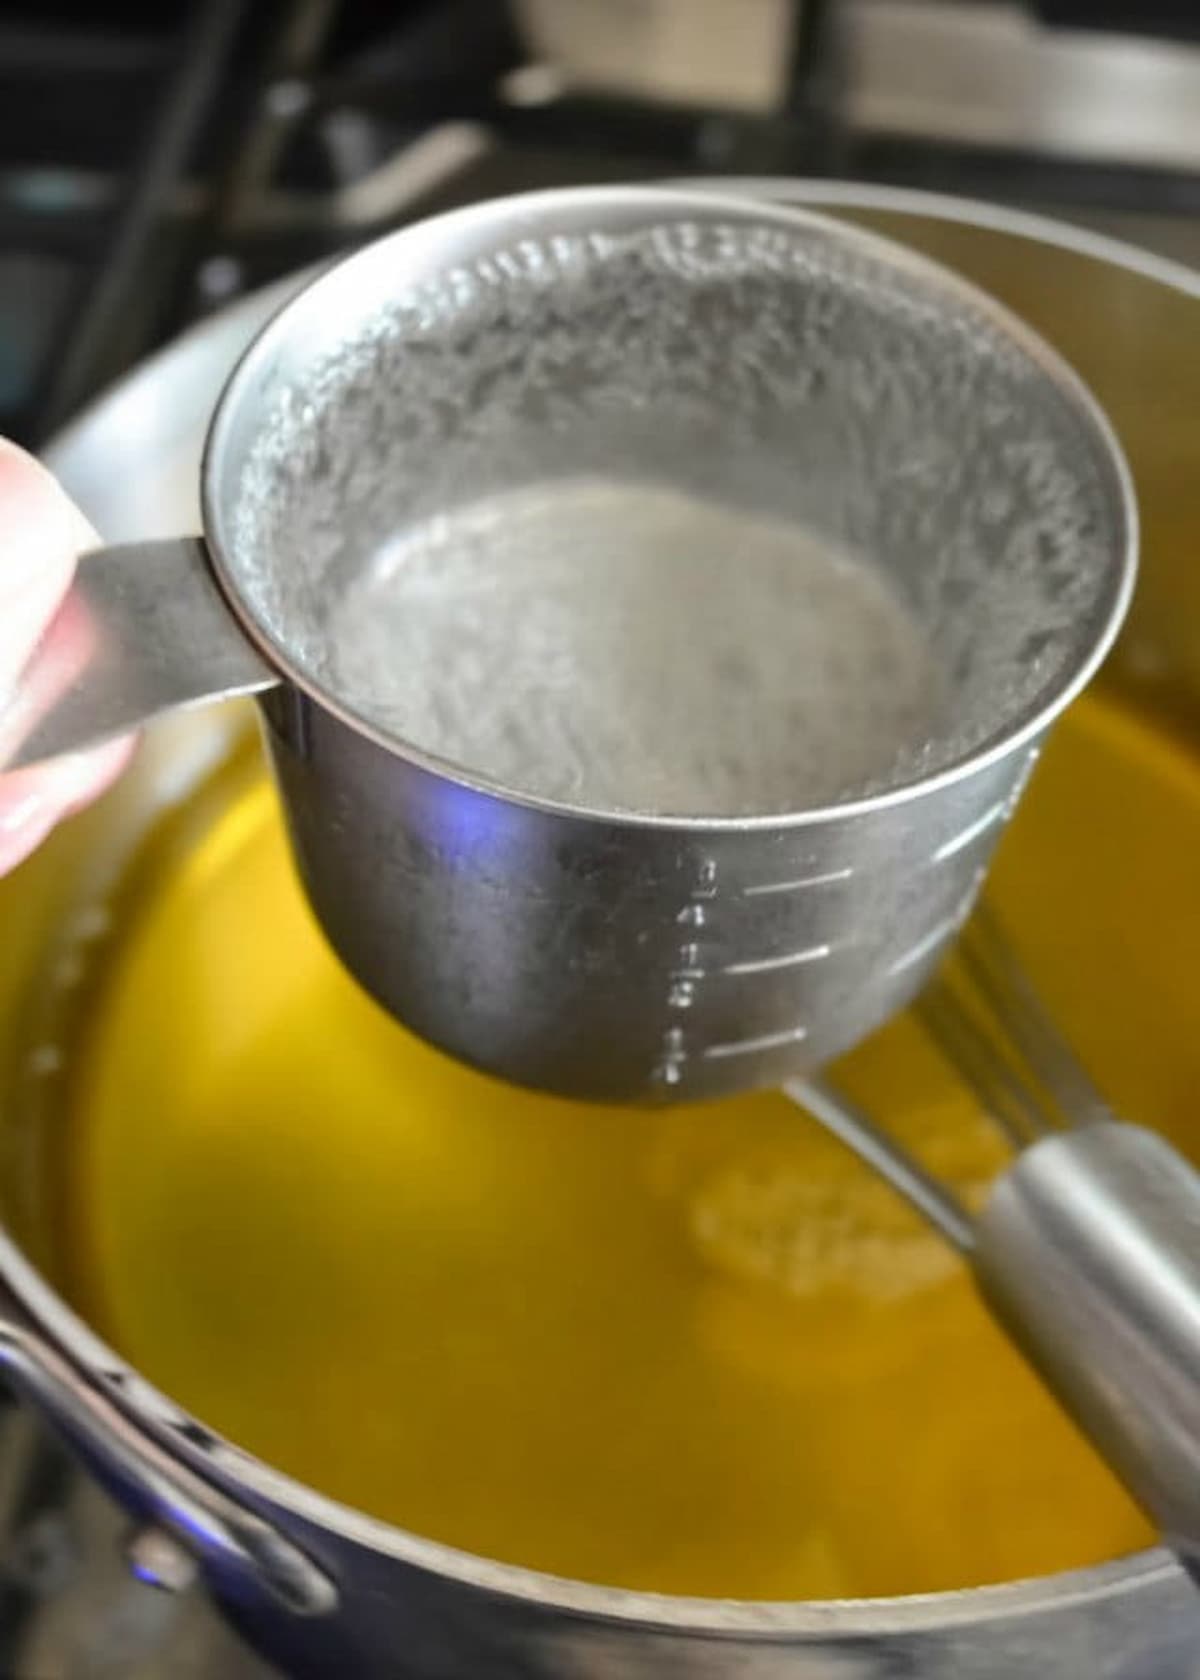 7 Up being stirred into Lemon Jello in a large sauce pan.